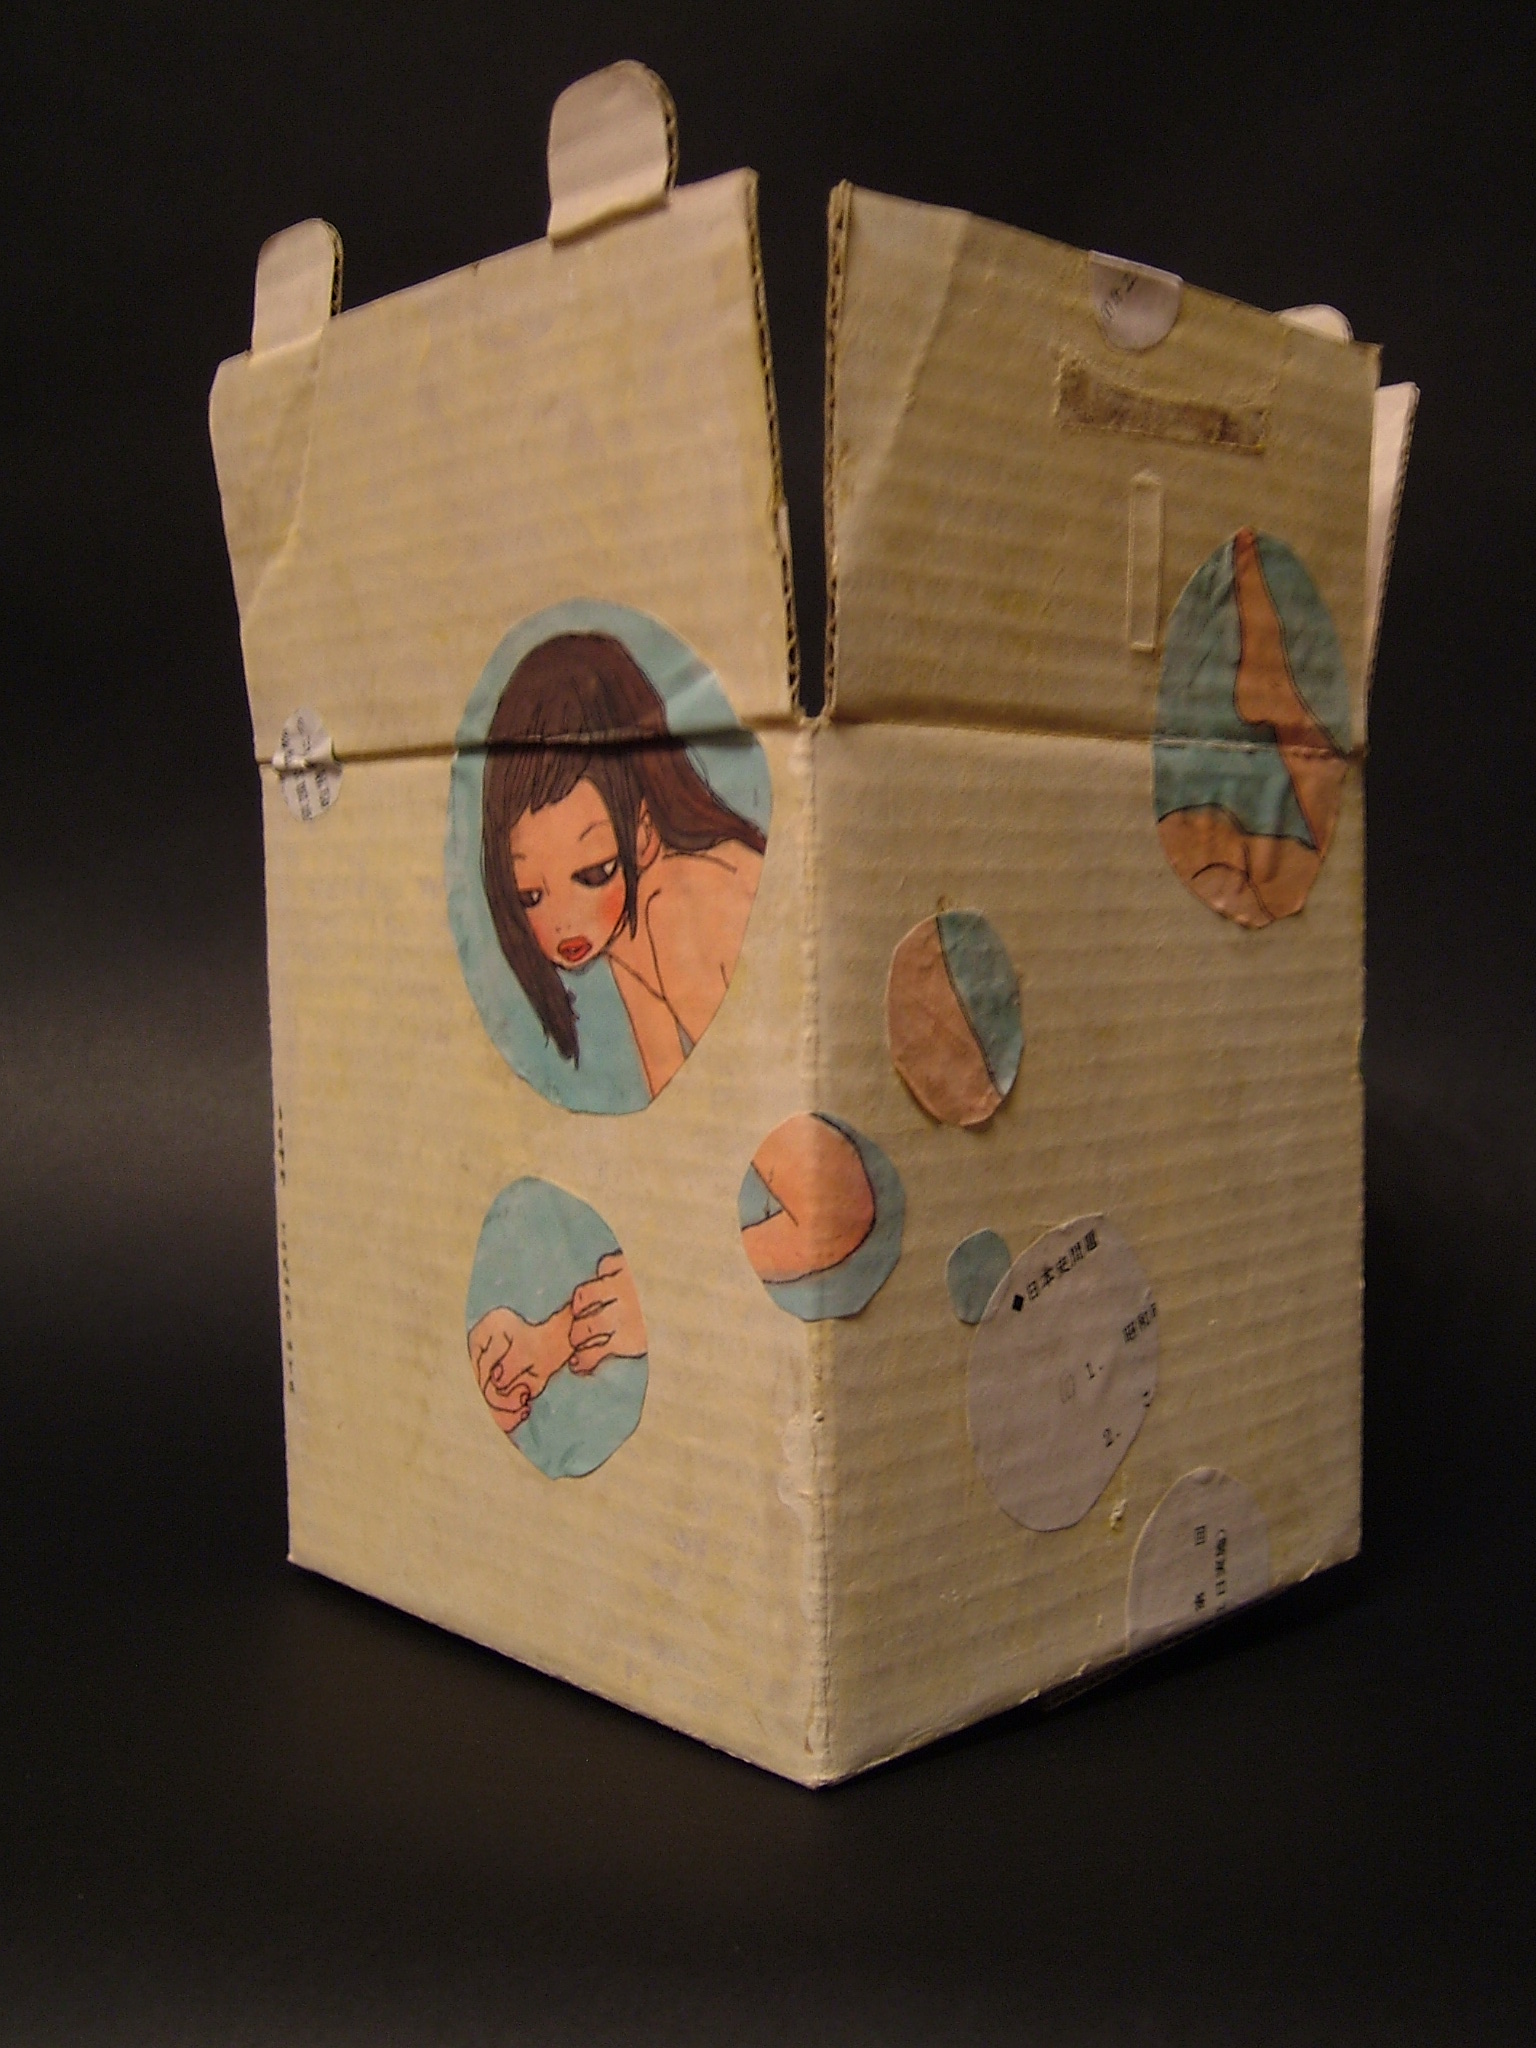  "Naked Box" &nbsp;(1997)  Painting/ Collage on cardboard  8.7 x 6.2 x 5.7 in 